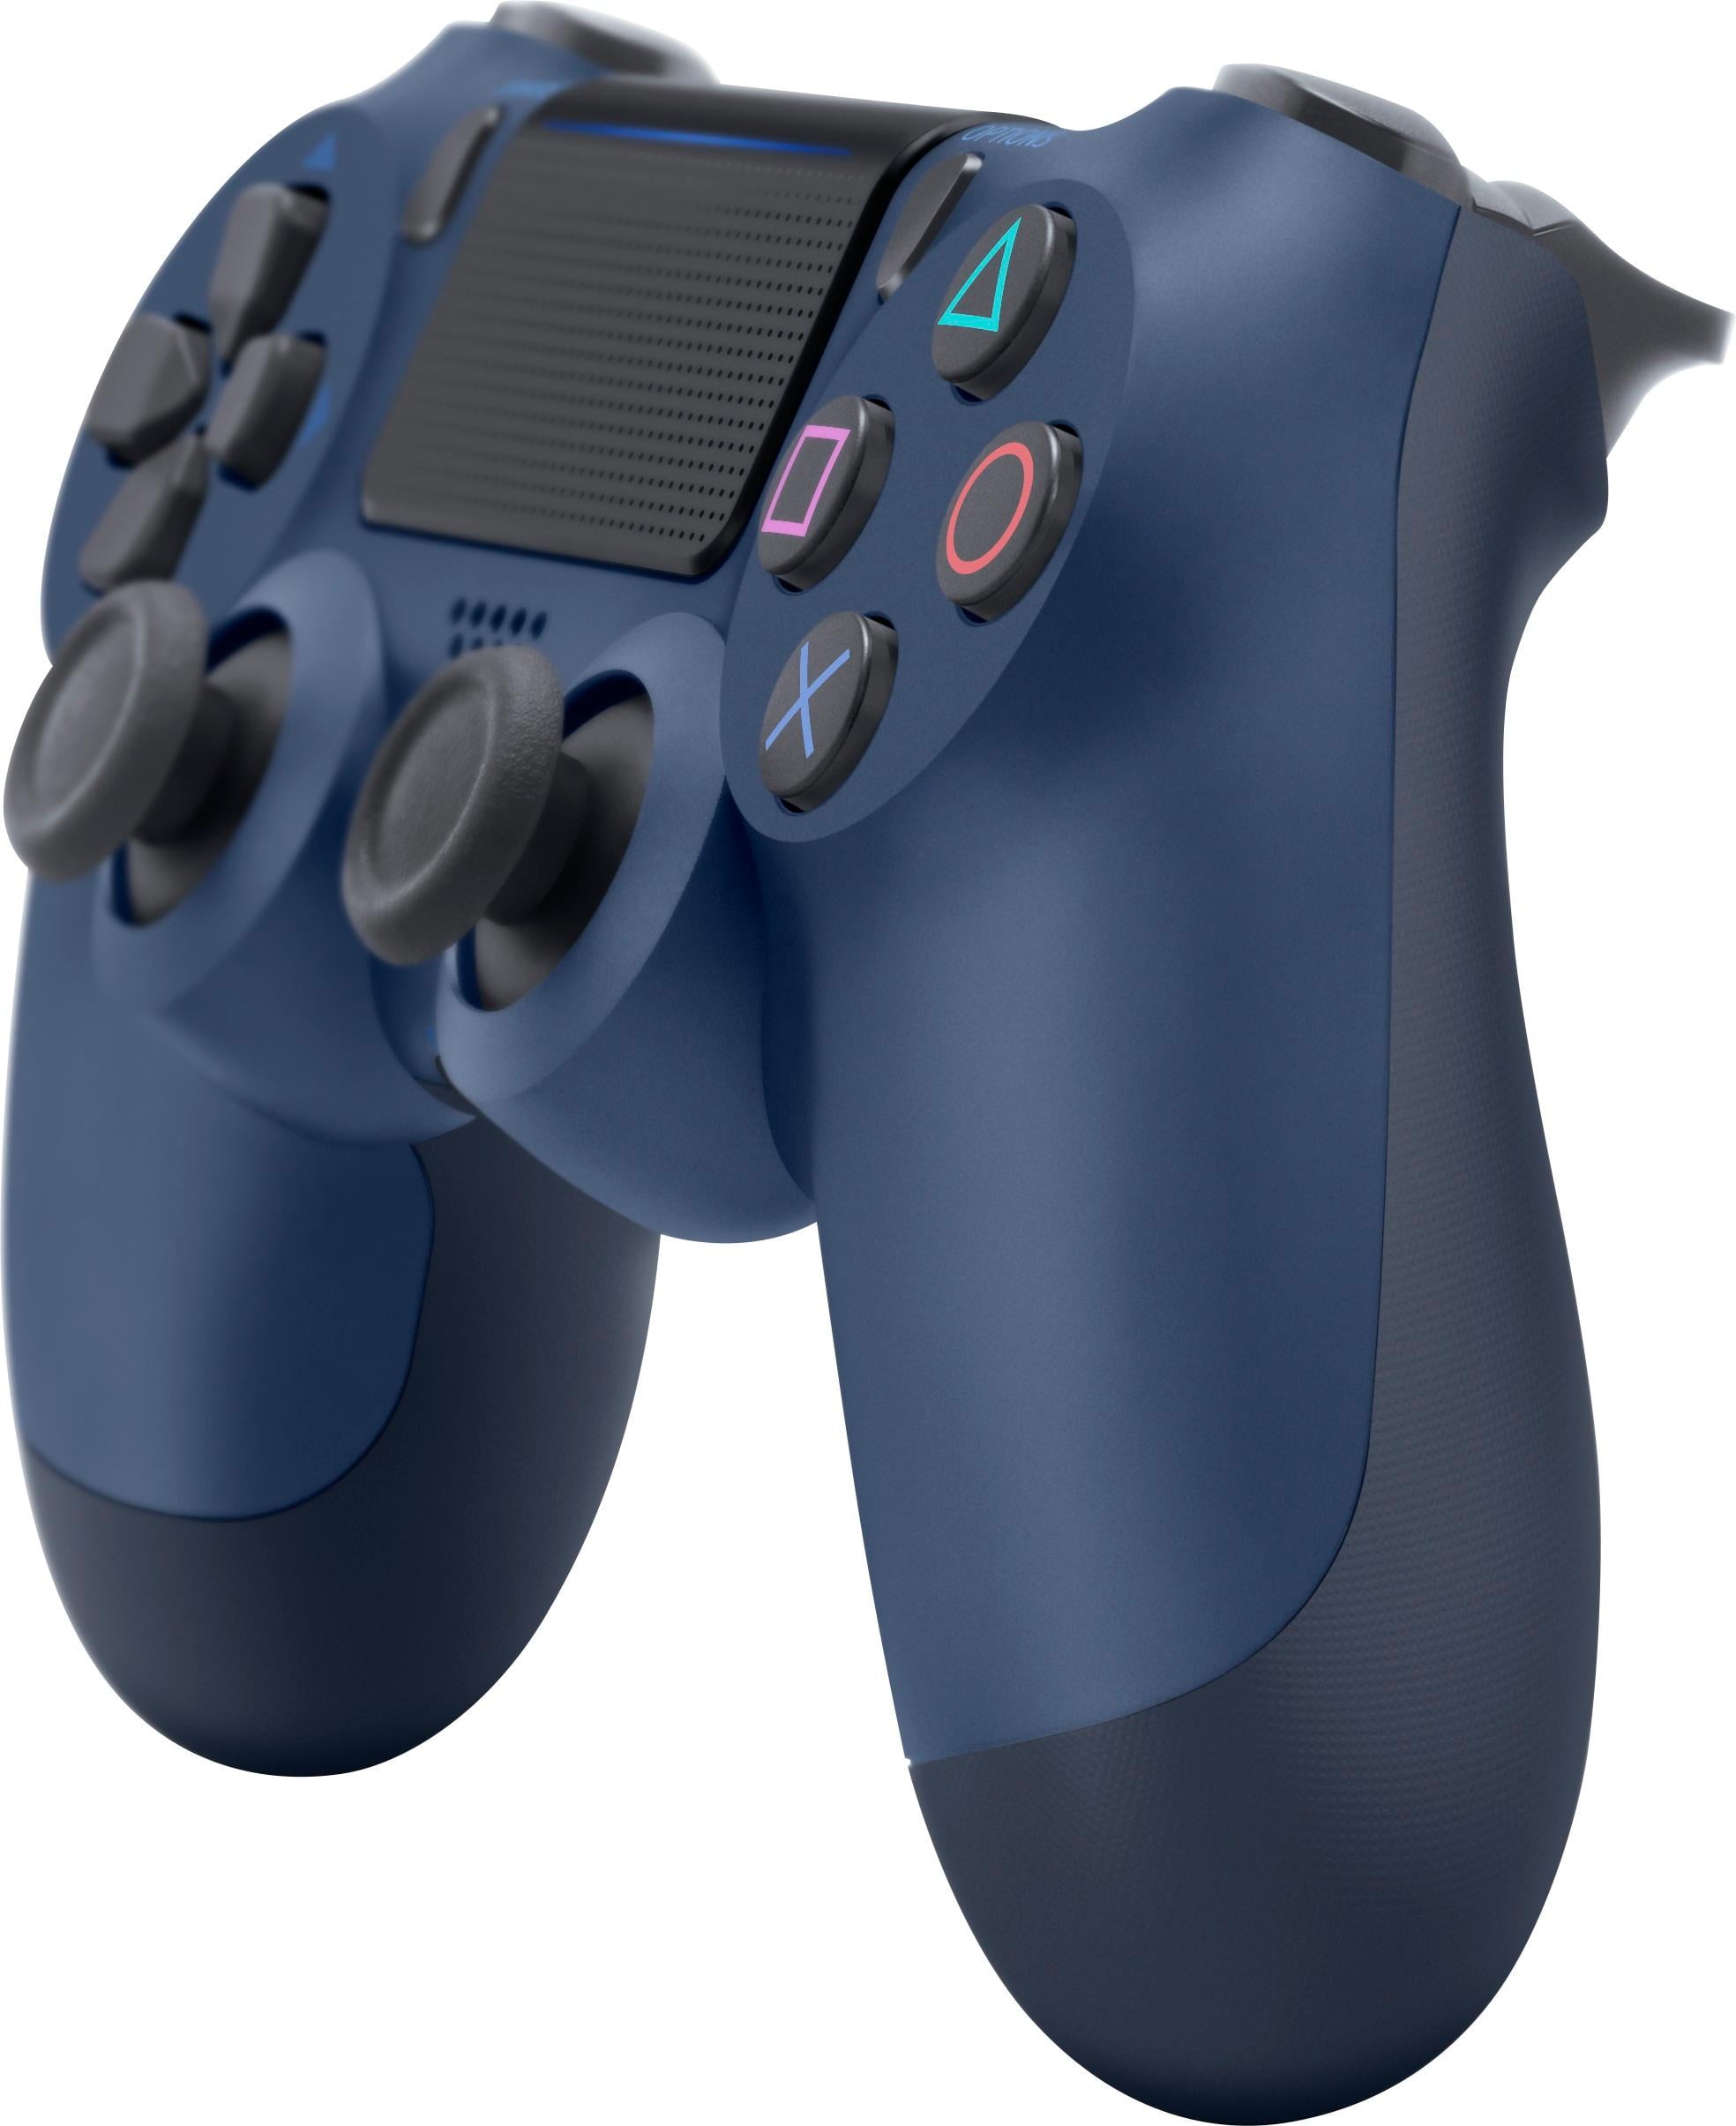 baby blue ps4 controller